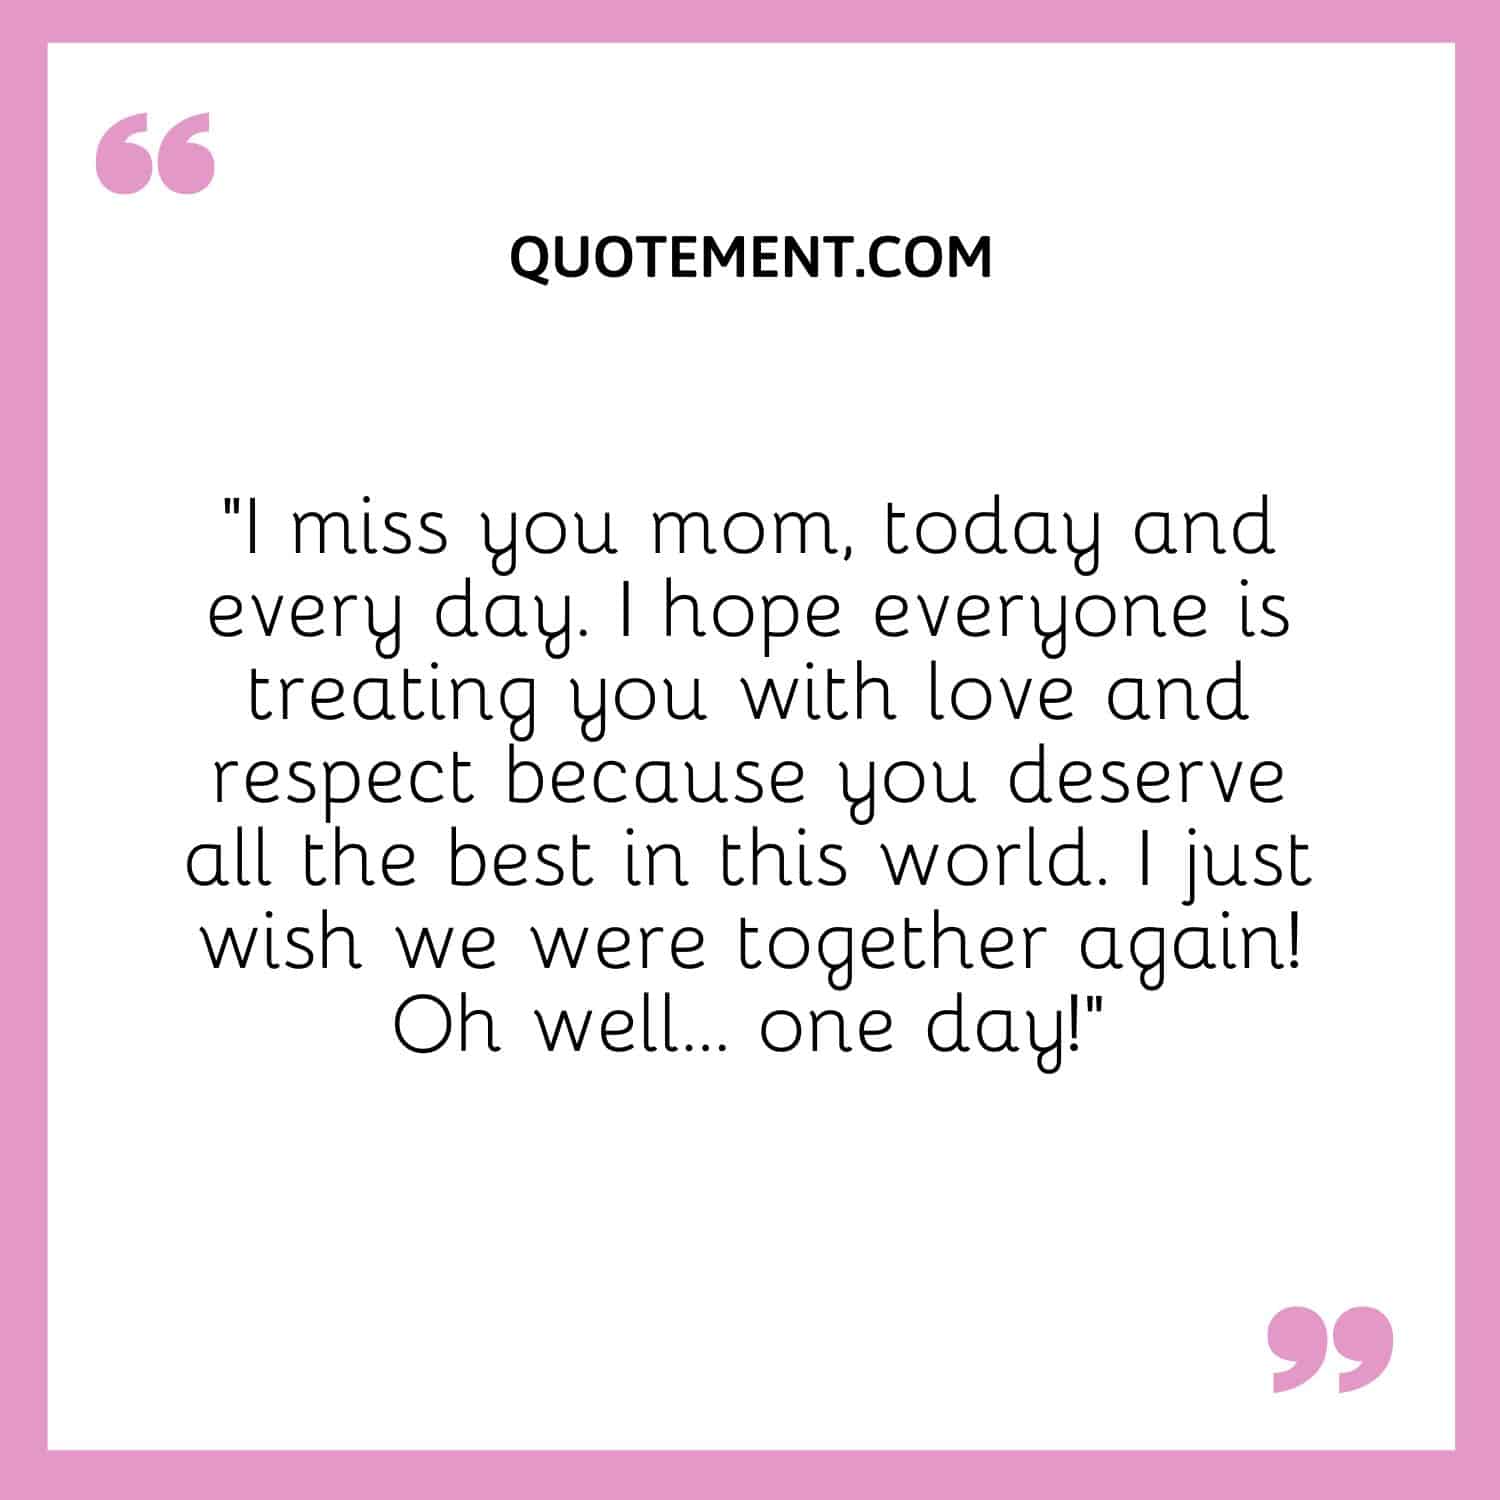 I miss you mom, today and every day